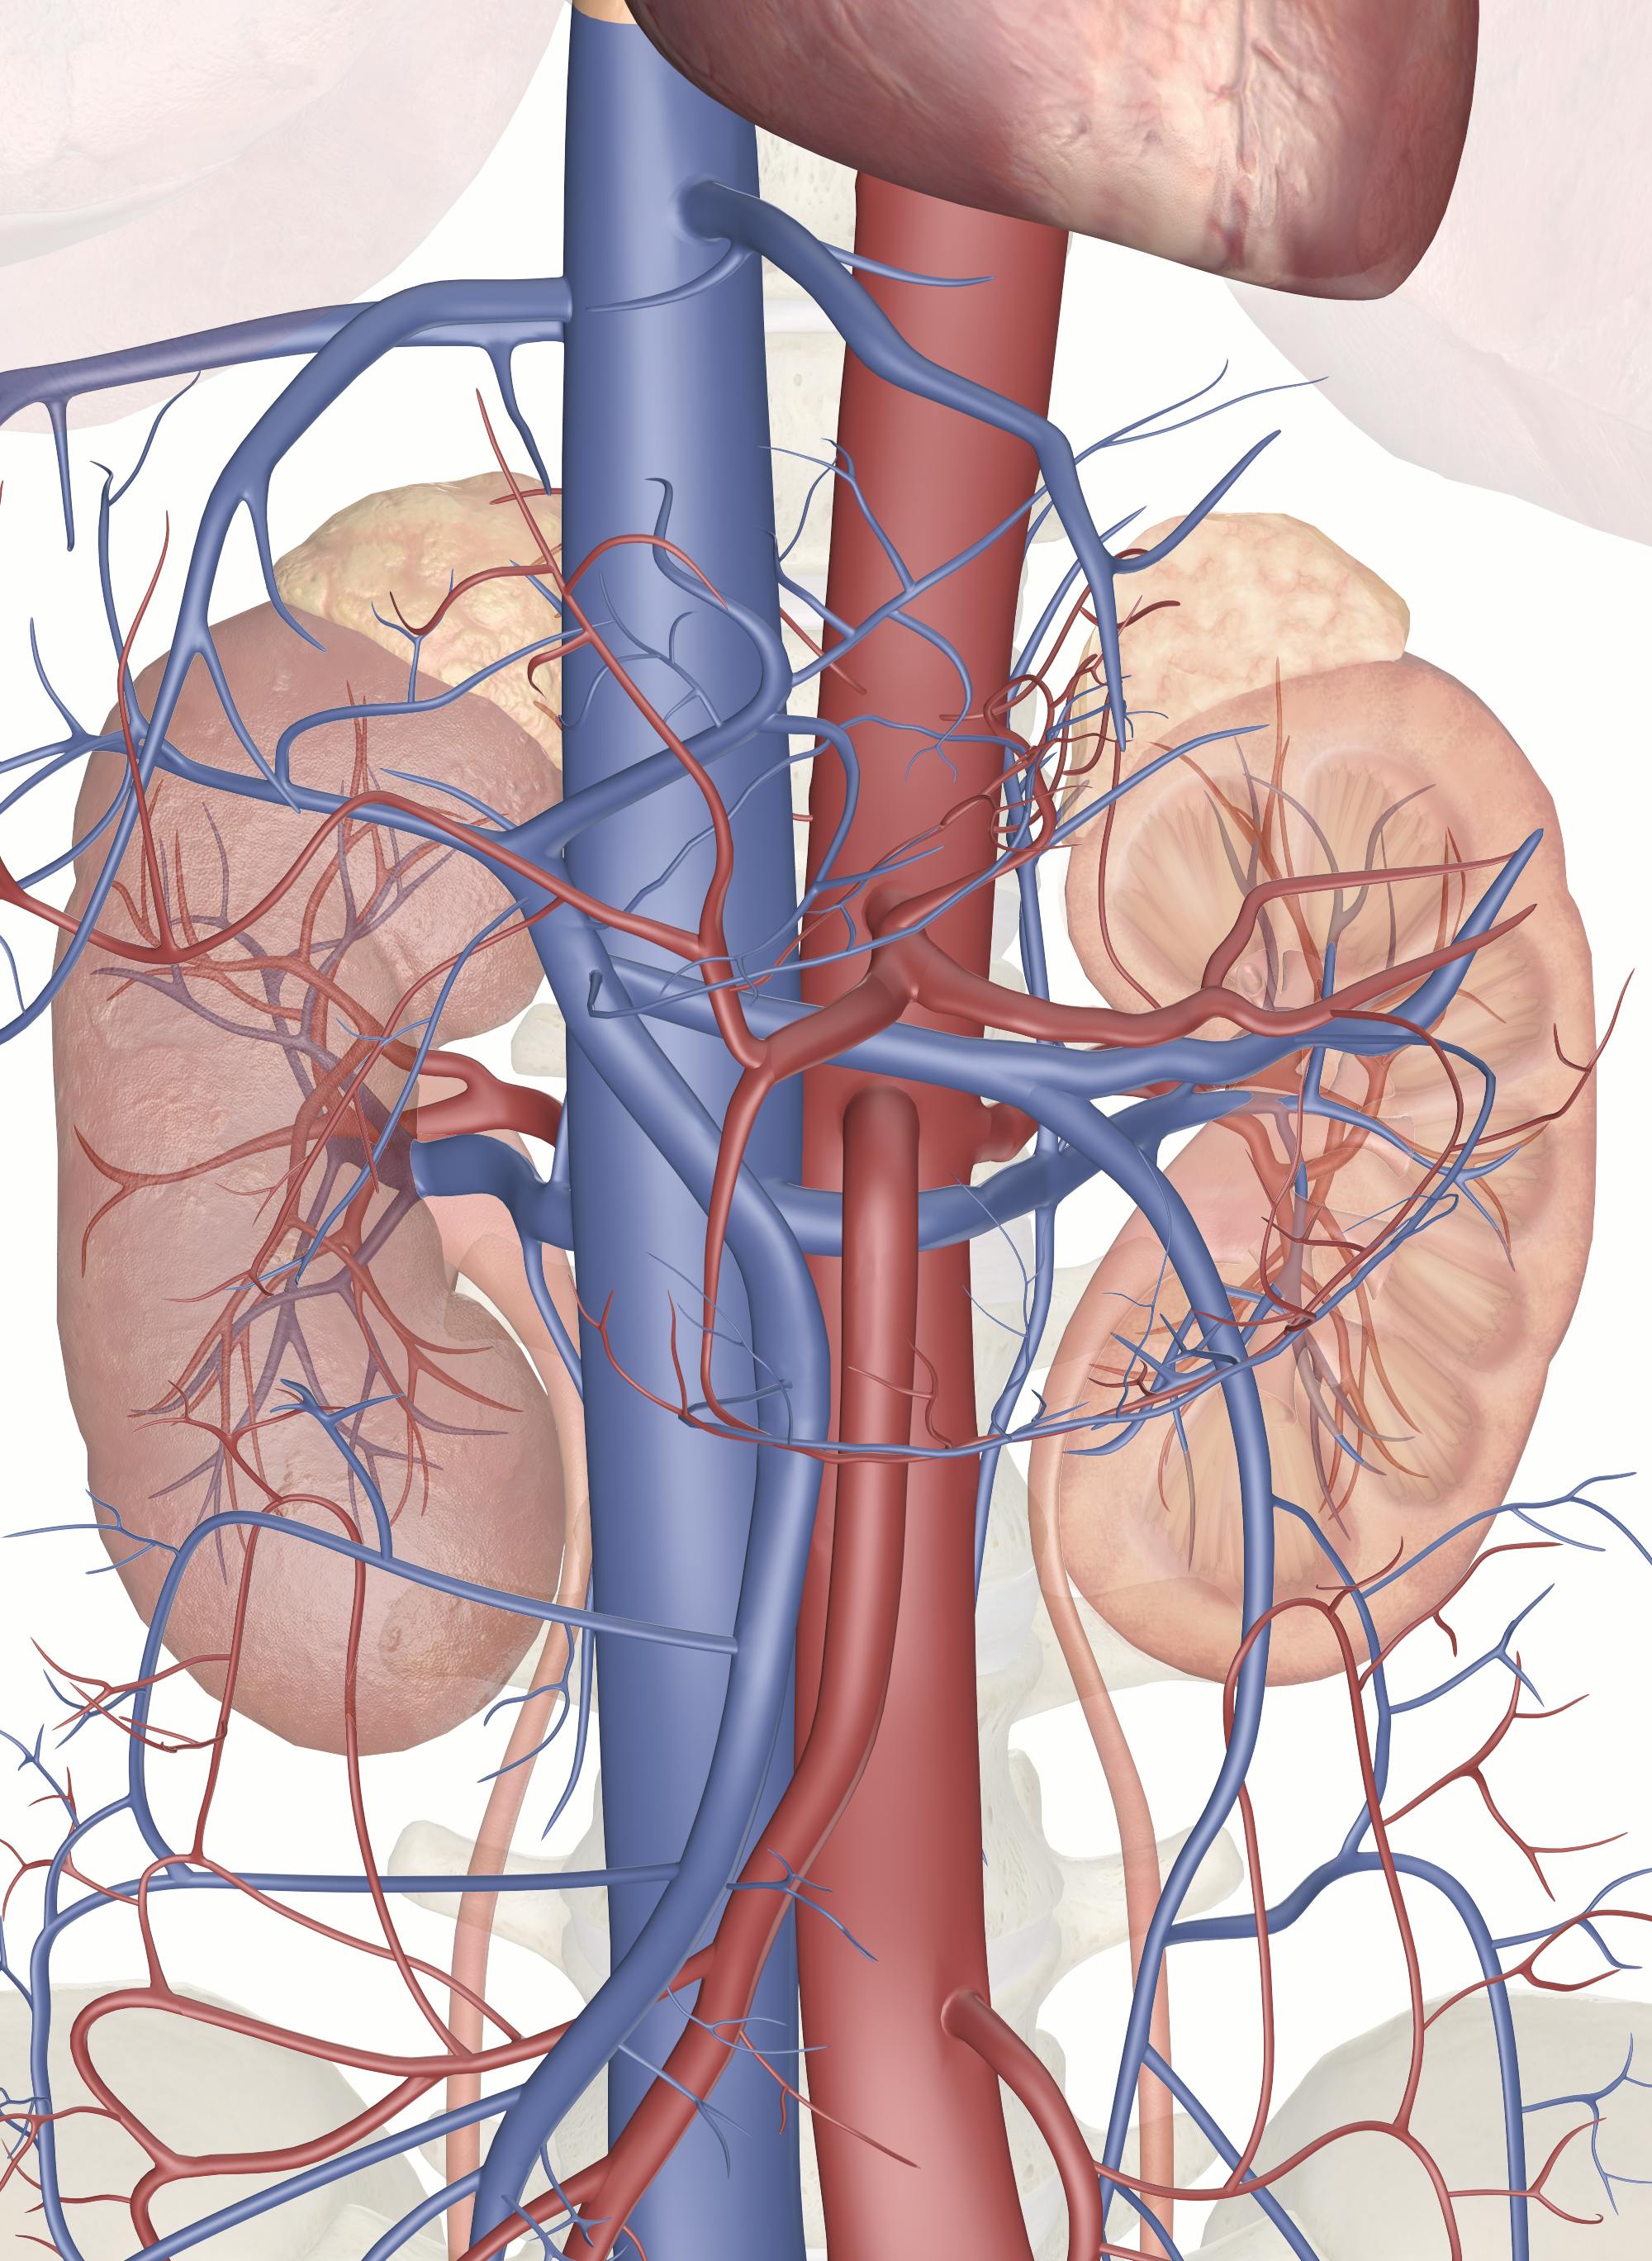 the-functions-of-the-kidney-3d-anatomy-model